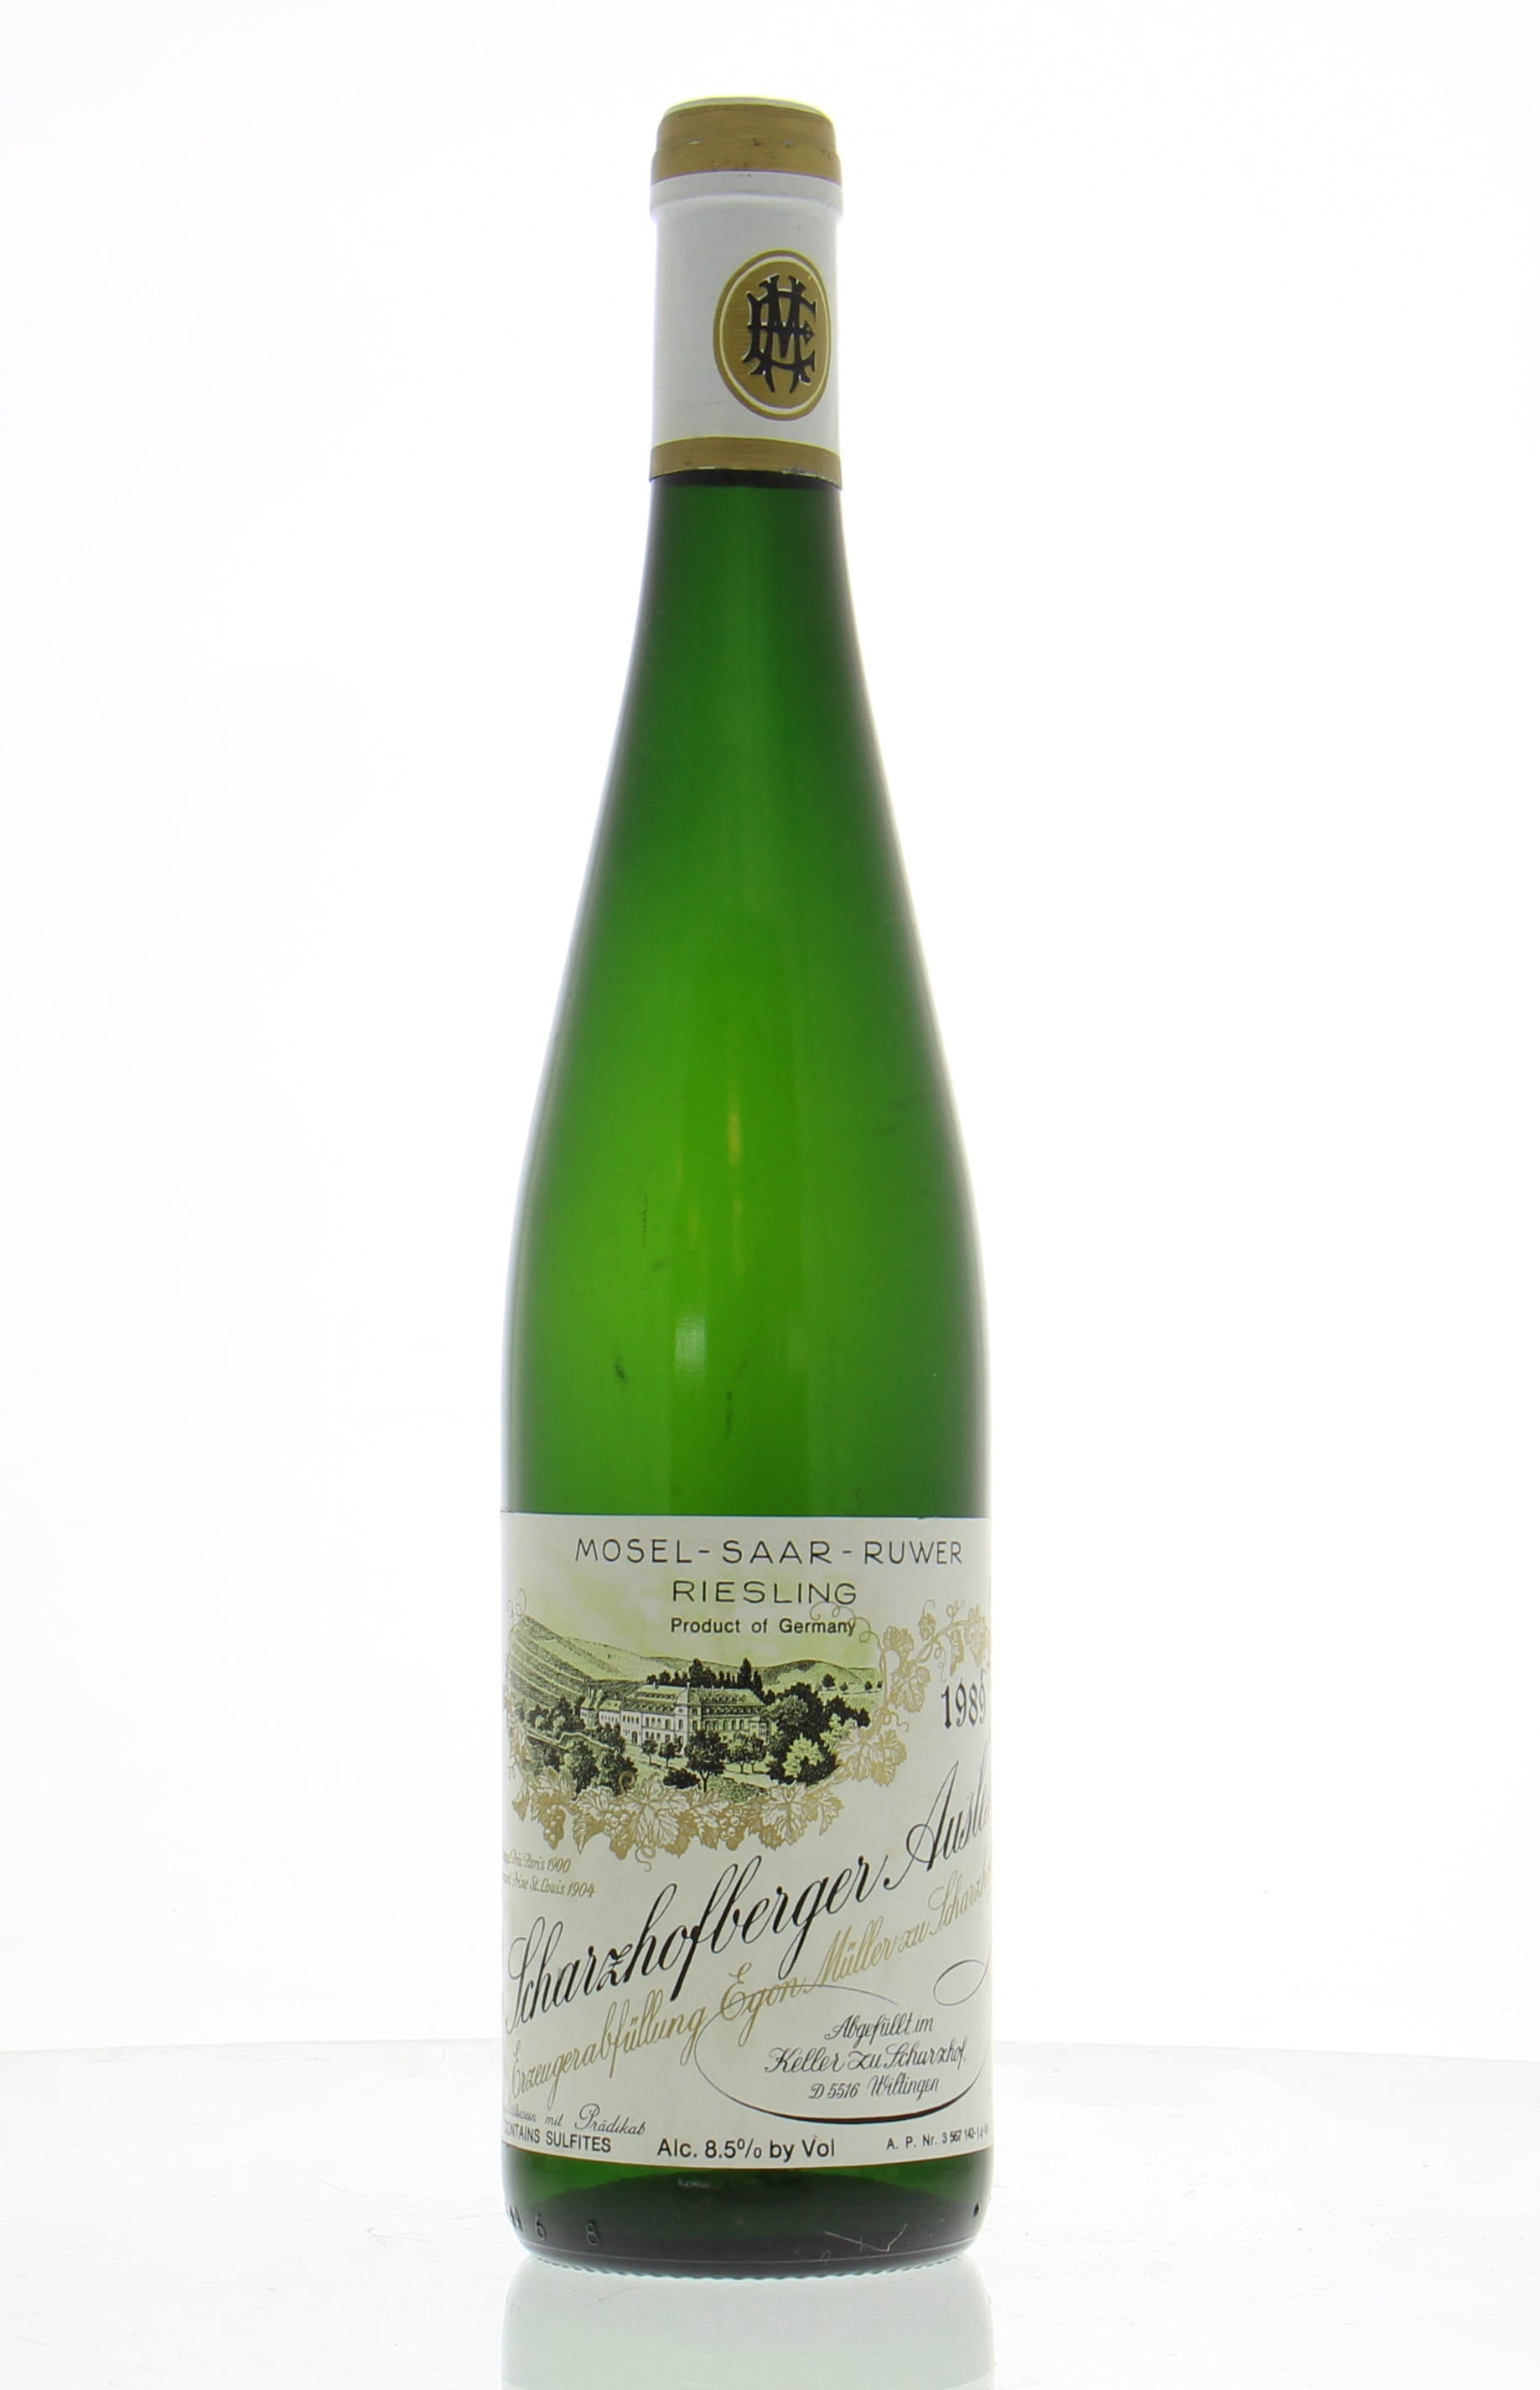 Egon Muller - Scharzhofberger Riesling Auslese 1989 Perfect